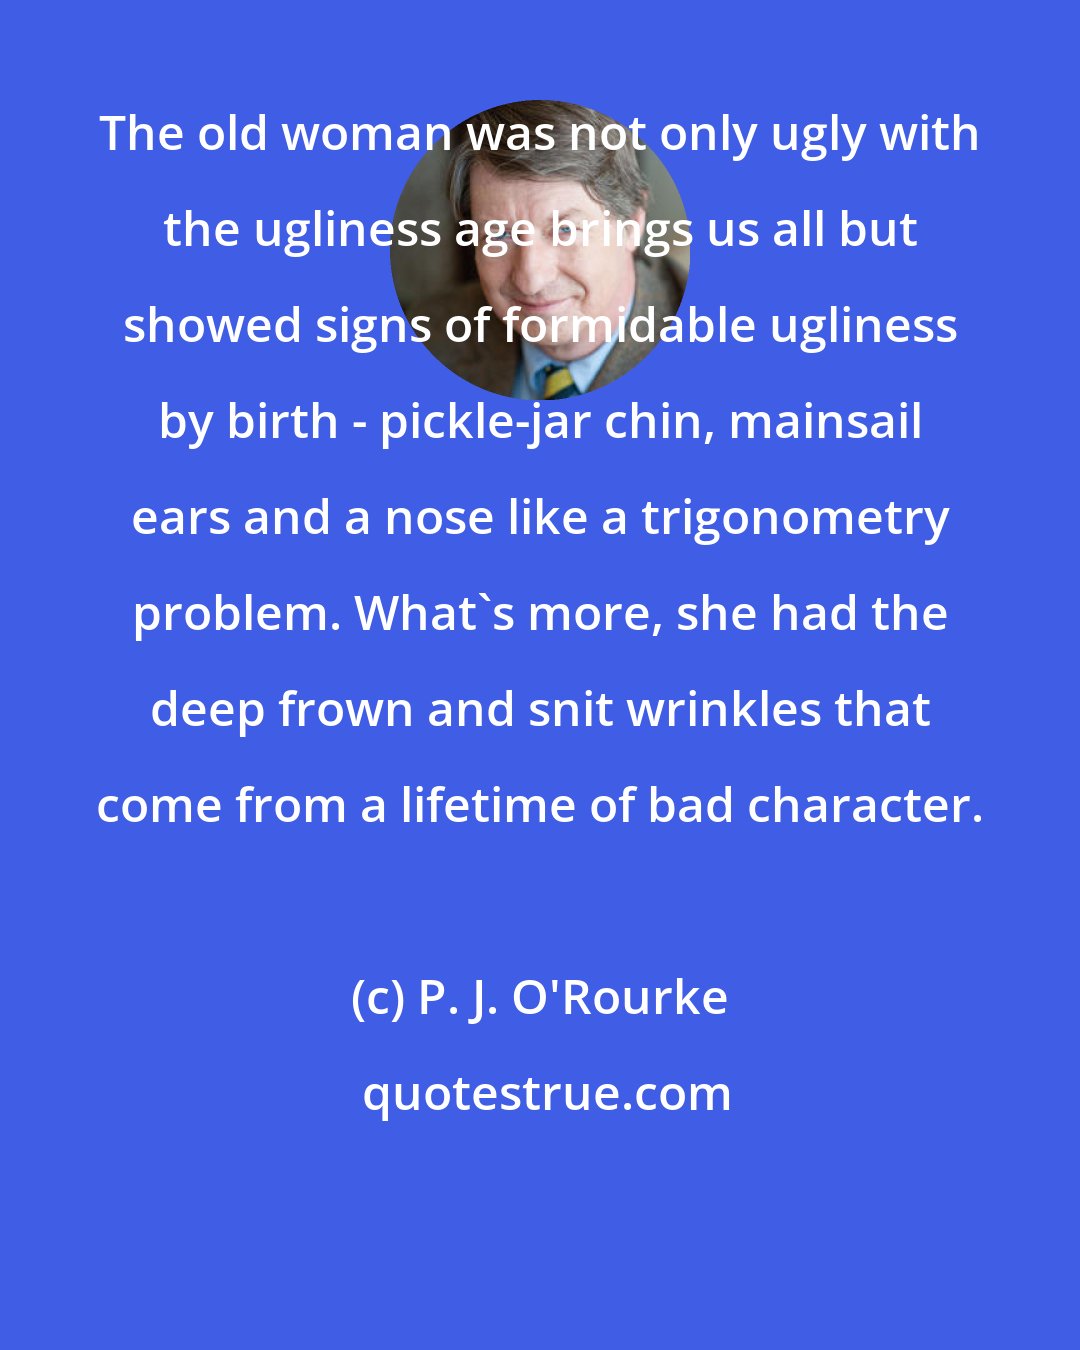 P. J. O'Rourke: The old woman was not only ugly with the ugliness age brings us all but showed signs of formidable ugliness by birth - pickle-jar chin, mainsail ears and a nose like a trigonometry problem. What's more, she had the deep frown and snit wrinkles that come from a lifetime of bad character.